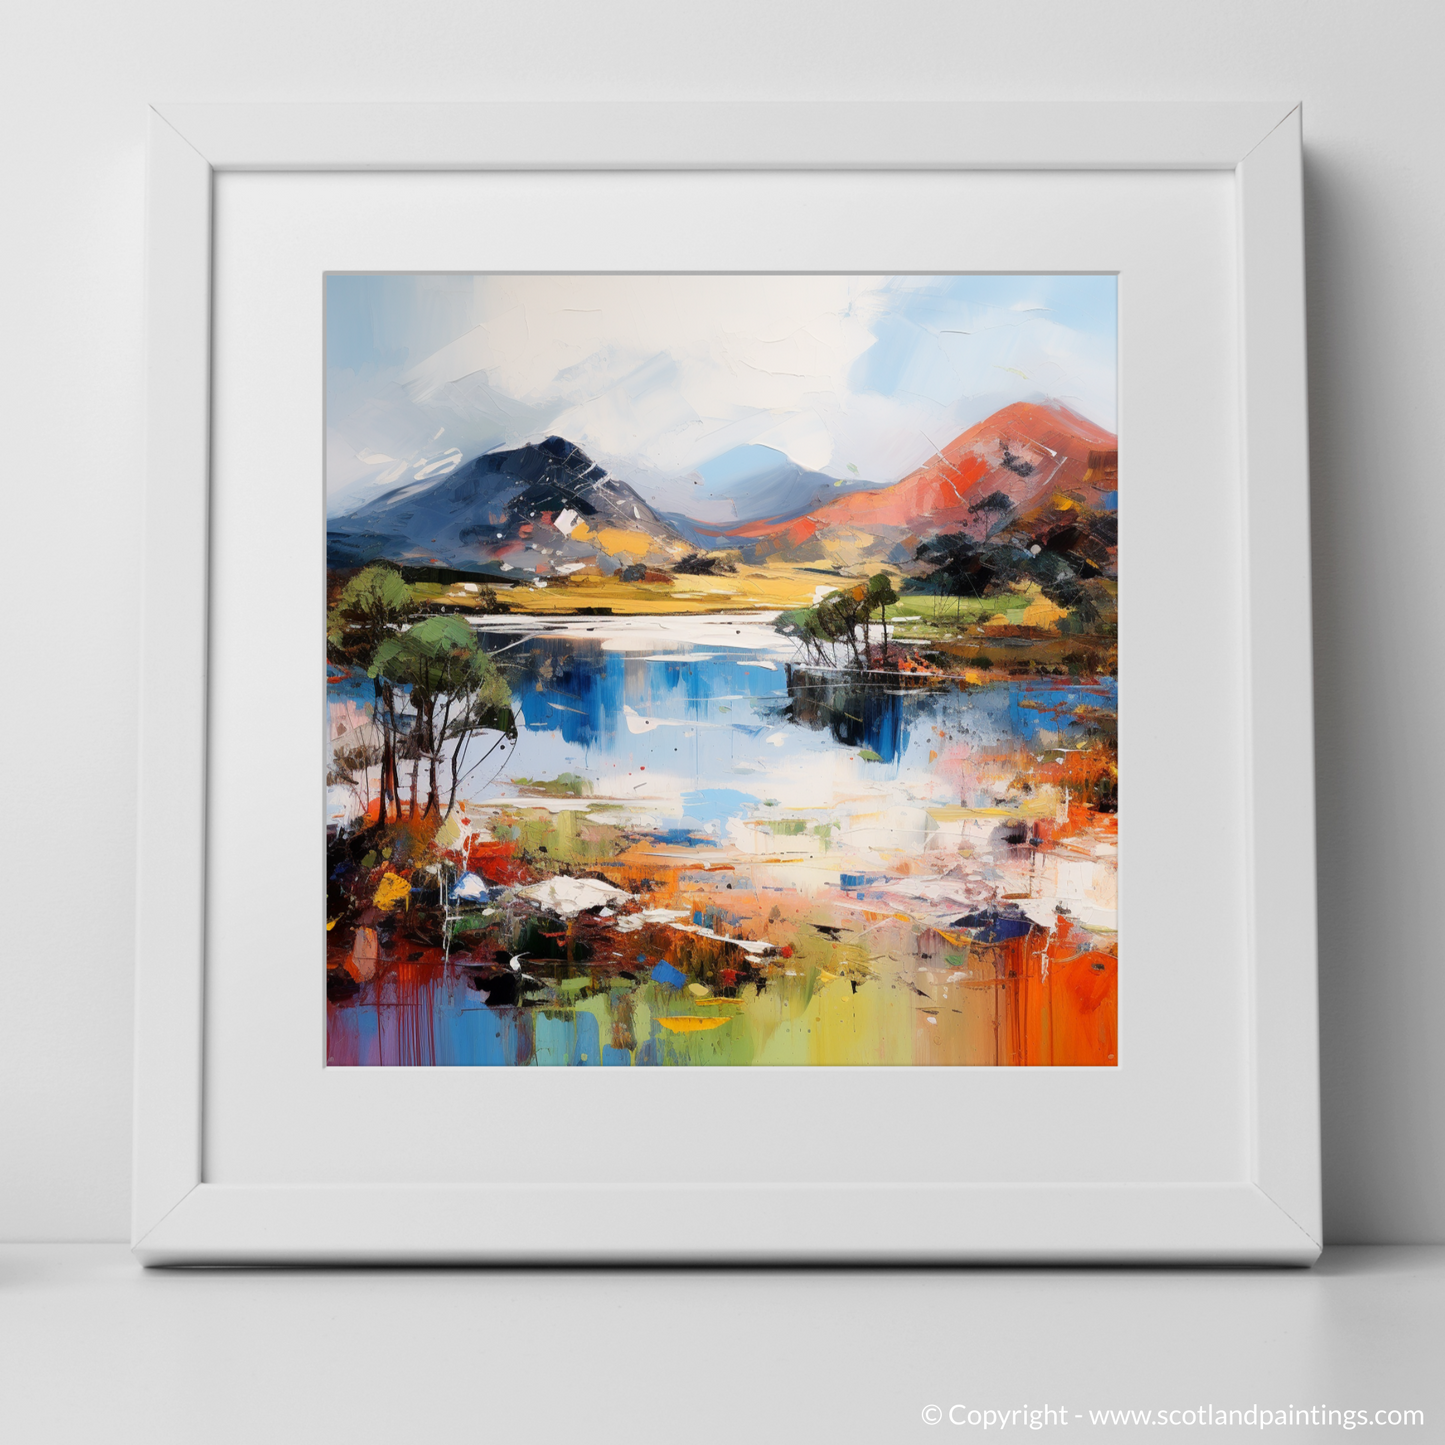 Art Print of Loch Glencoul, Sutherland in summer with a white frame